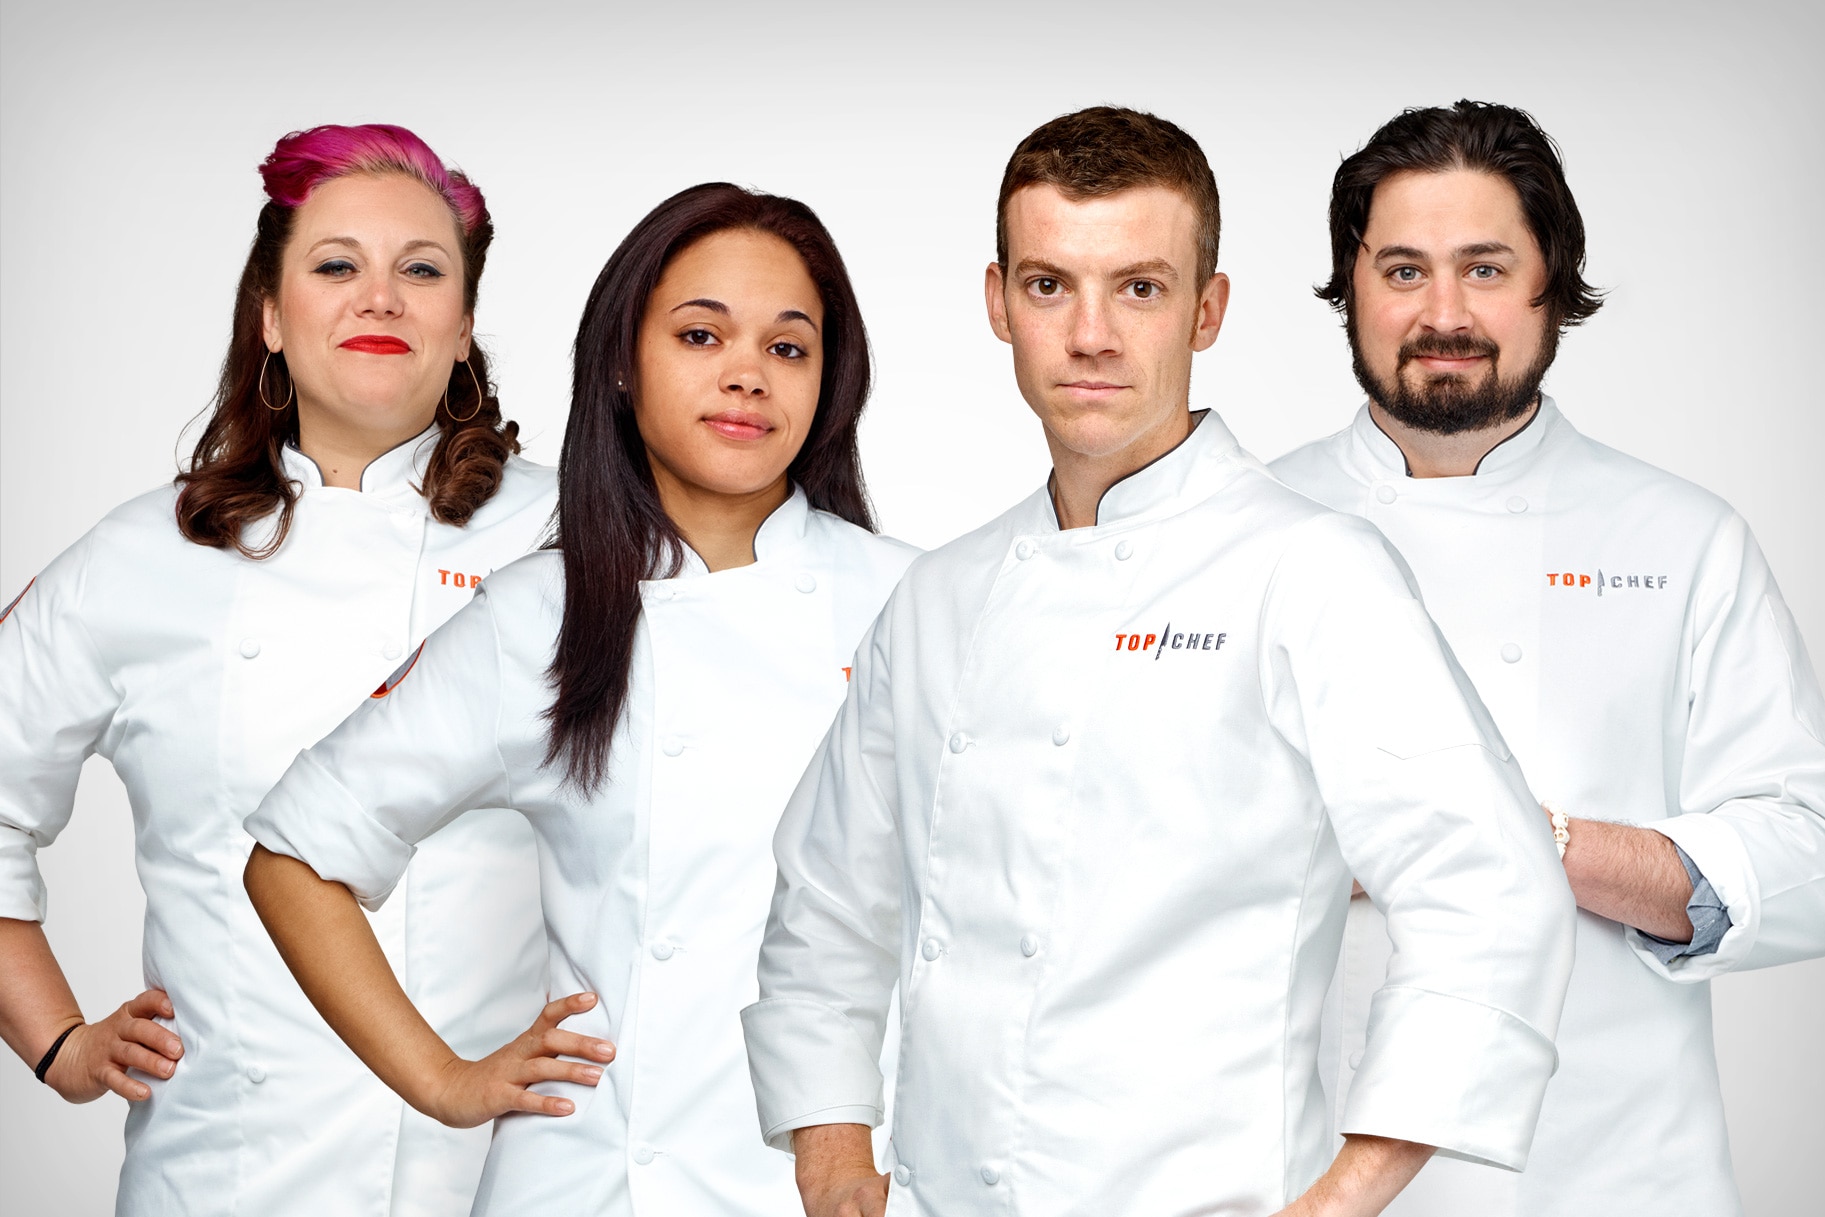 Top Chef / Watch Top Chef Season 5 Prime Video He competed on top